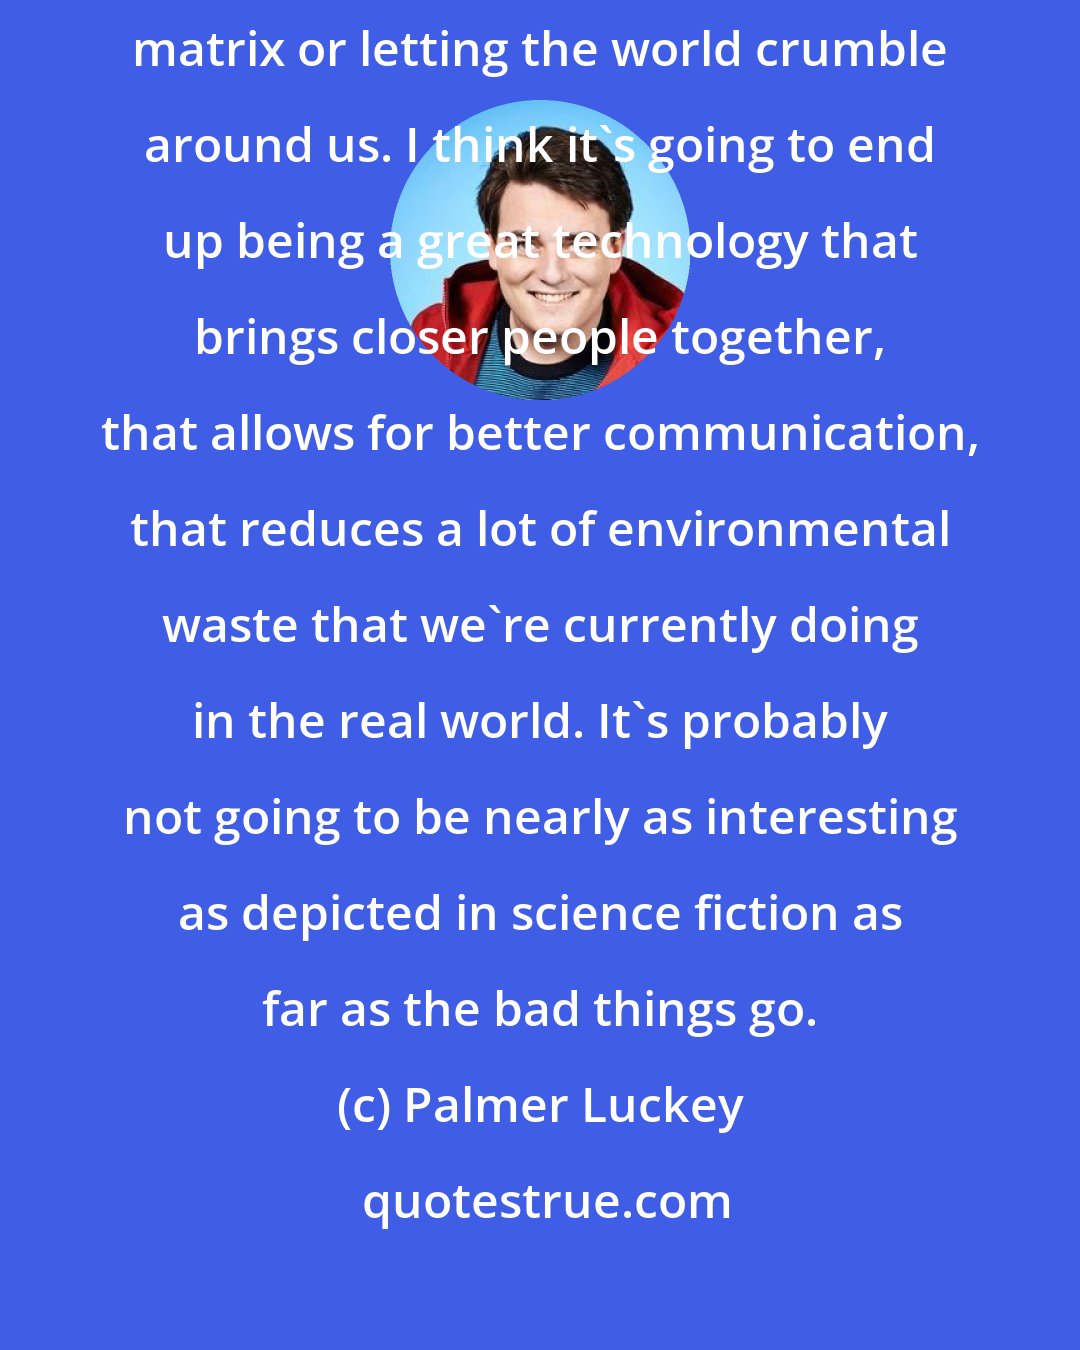 Palmer Luckey: I don't think that VR is going to lead to humanity being enslaved in the matrix or letting the world crumble around us. I think it's going to end up being a great technology that brings closer people together, that allows for better communication, that reduces a lot of environmental waste that we're currently doing in the real world. It's probably not going to be nearly as interesting as depicted in science fiction as far as the bad things go.